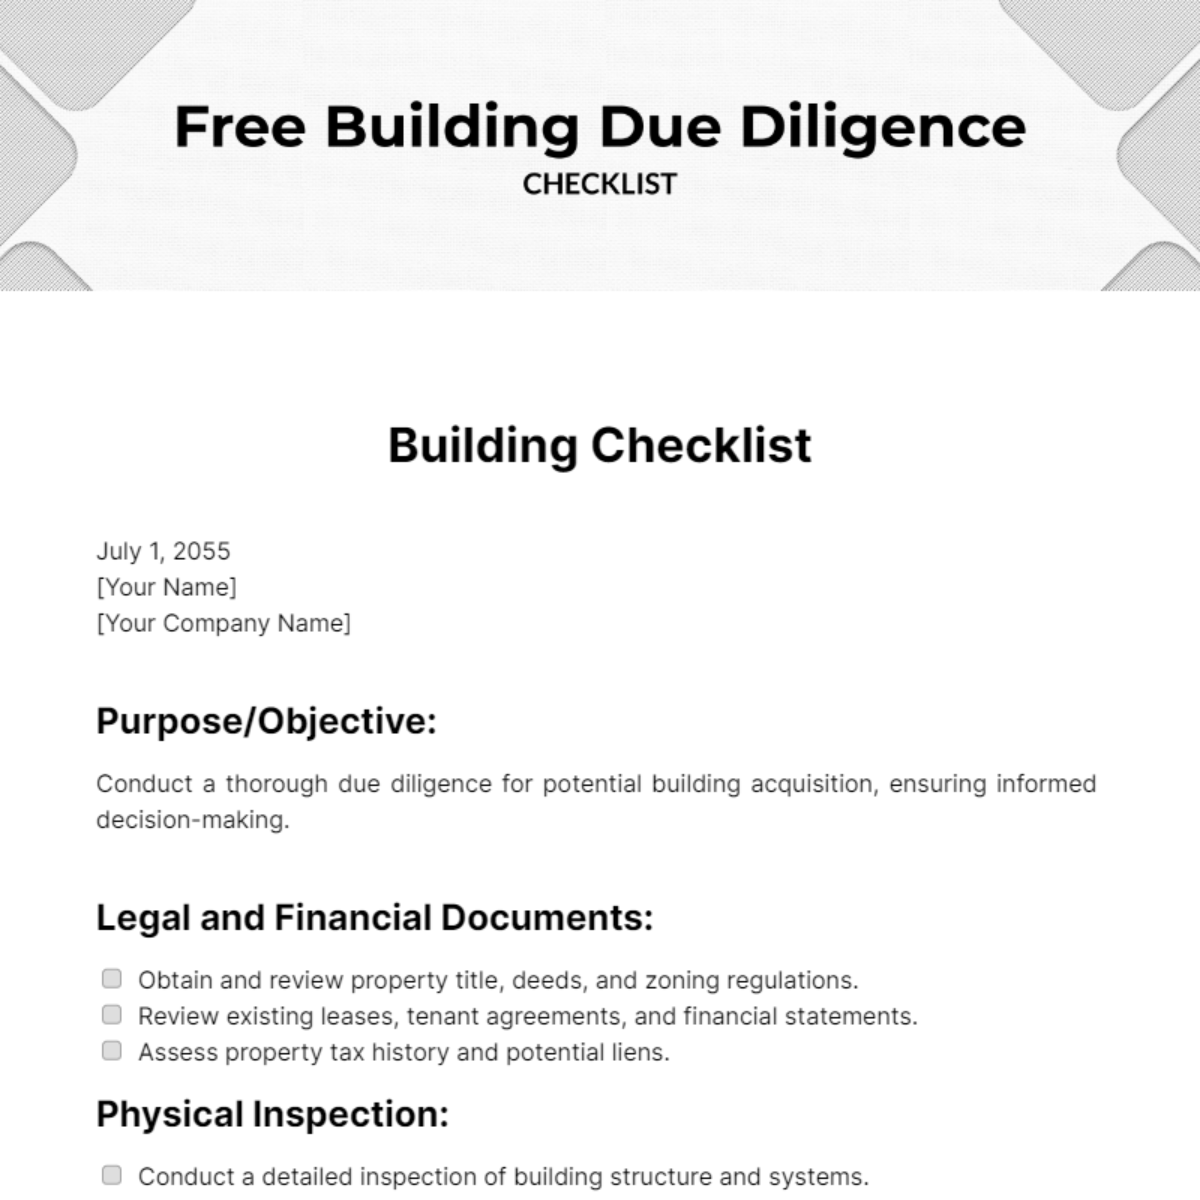 Free Building Due Diligence Checklist Template